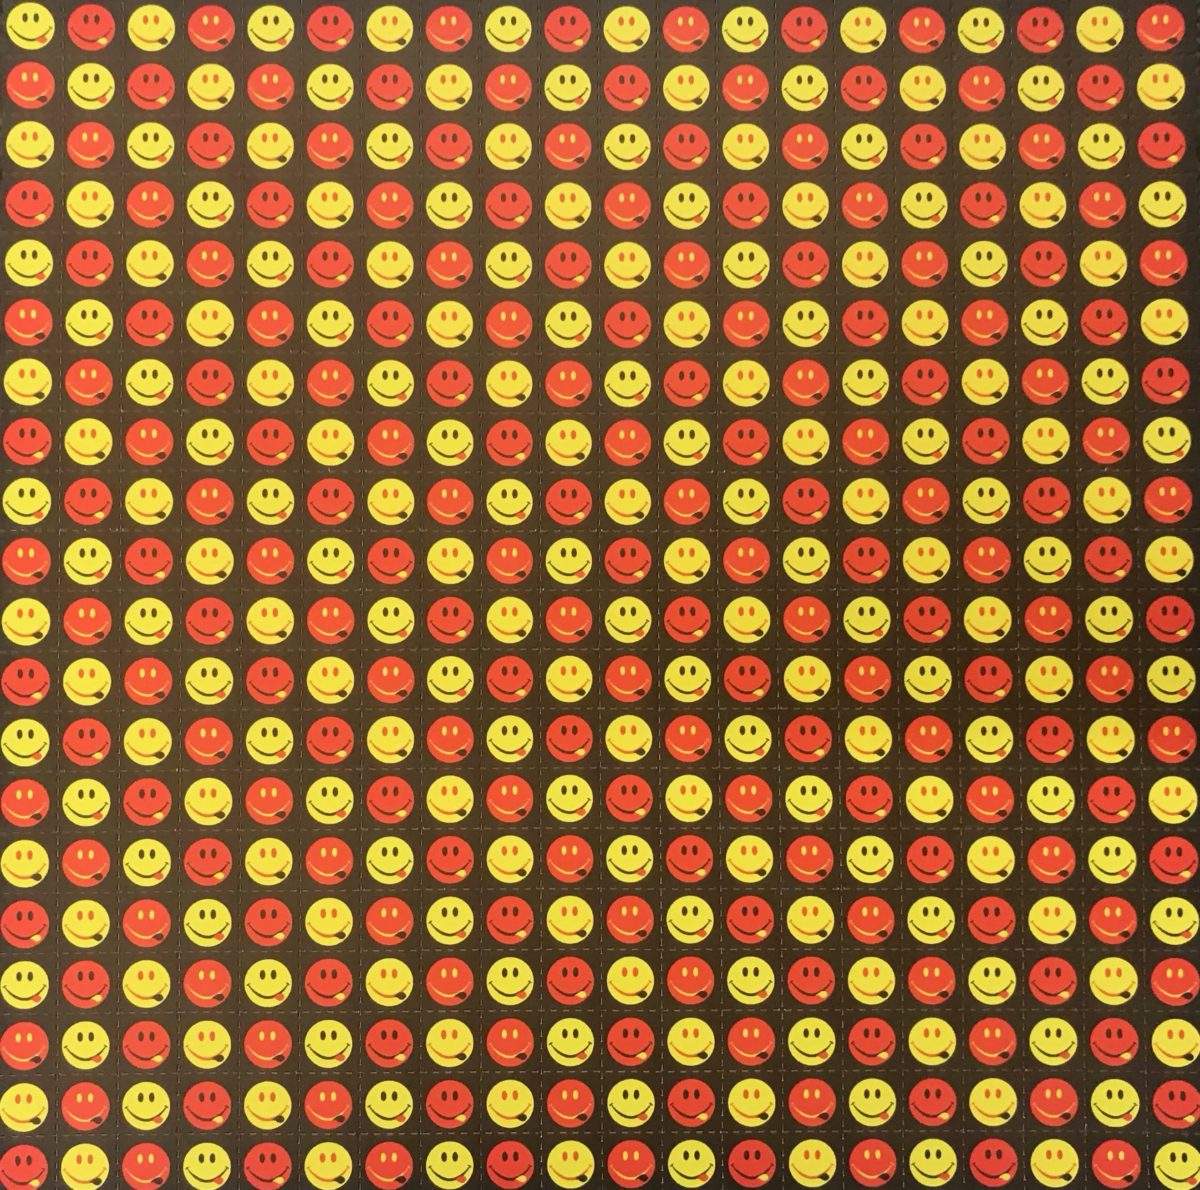 Blotter Art Red and Yellow Smileys